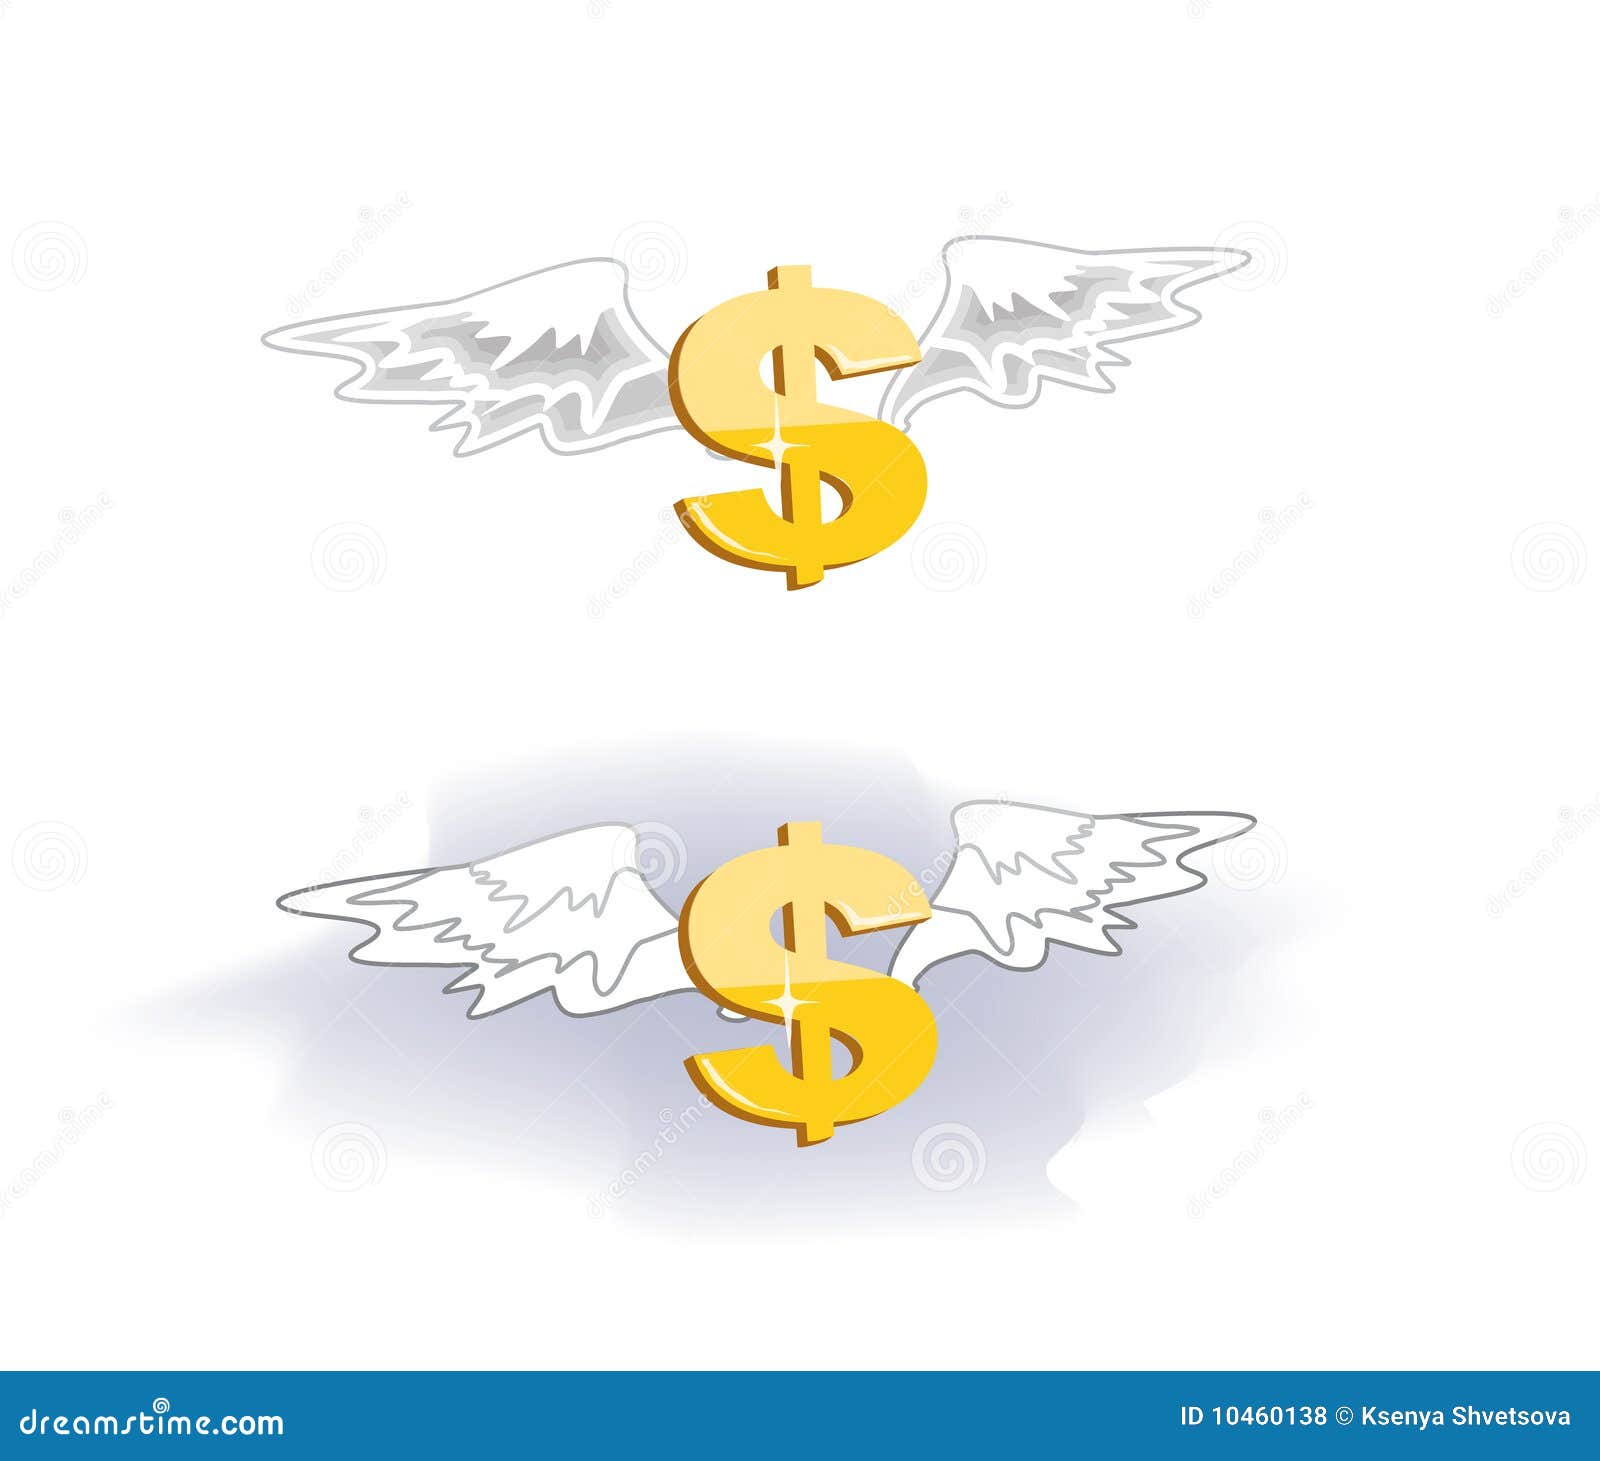 clipart flying dollar sign - photo #3